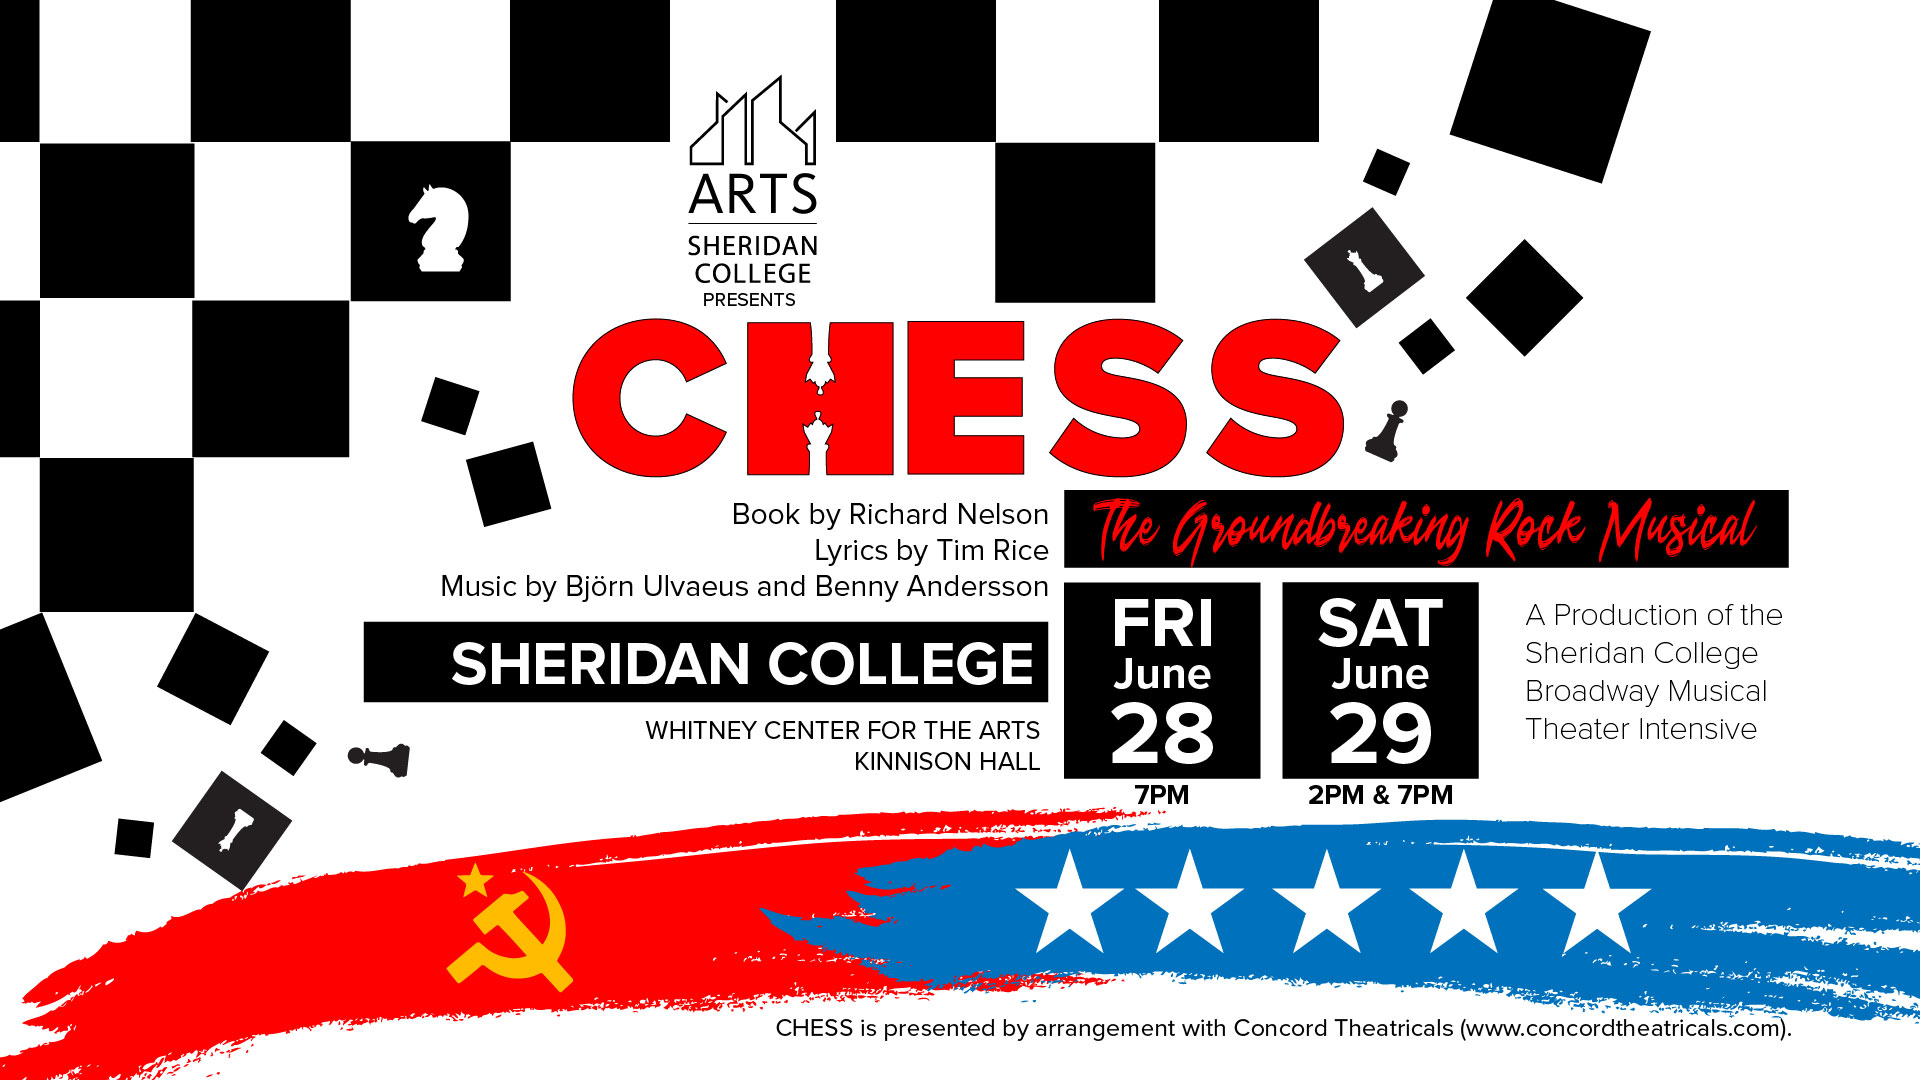 Banner with text describing the rock musical Chess with three performances at Sheridan College